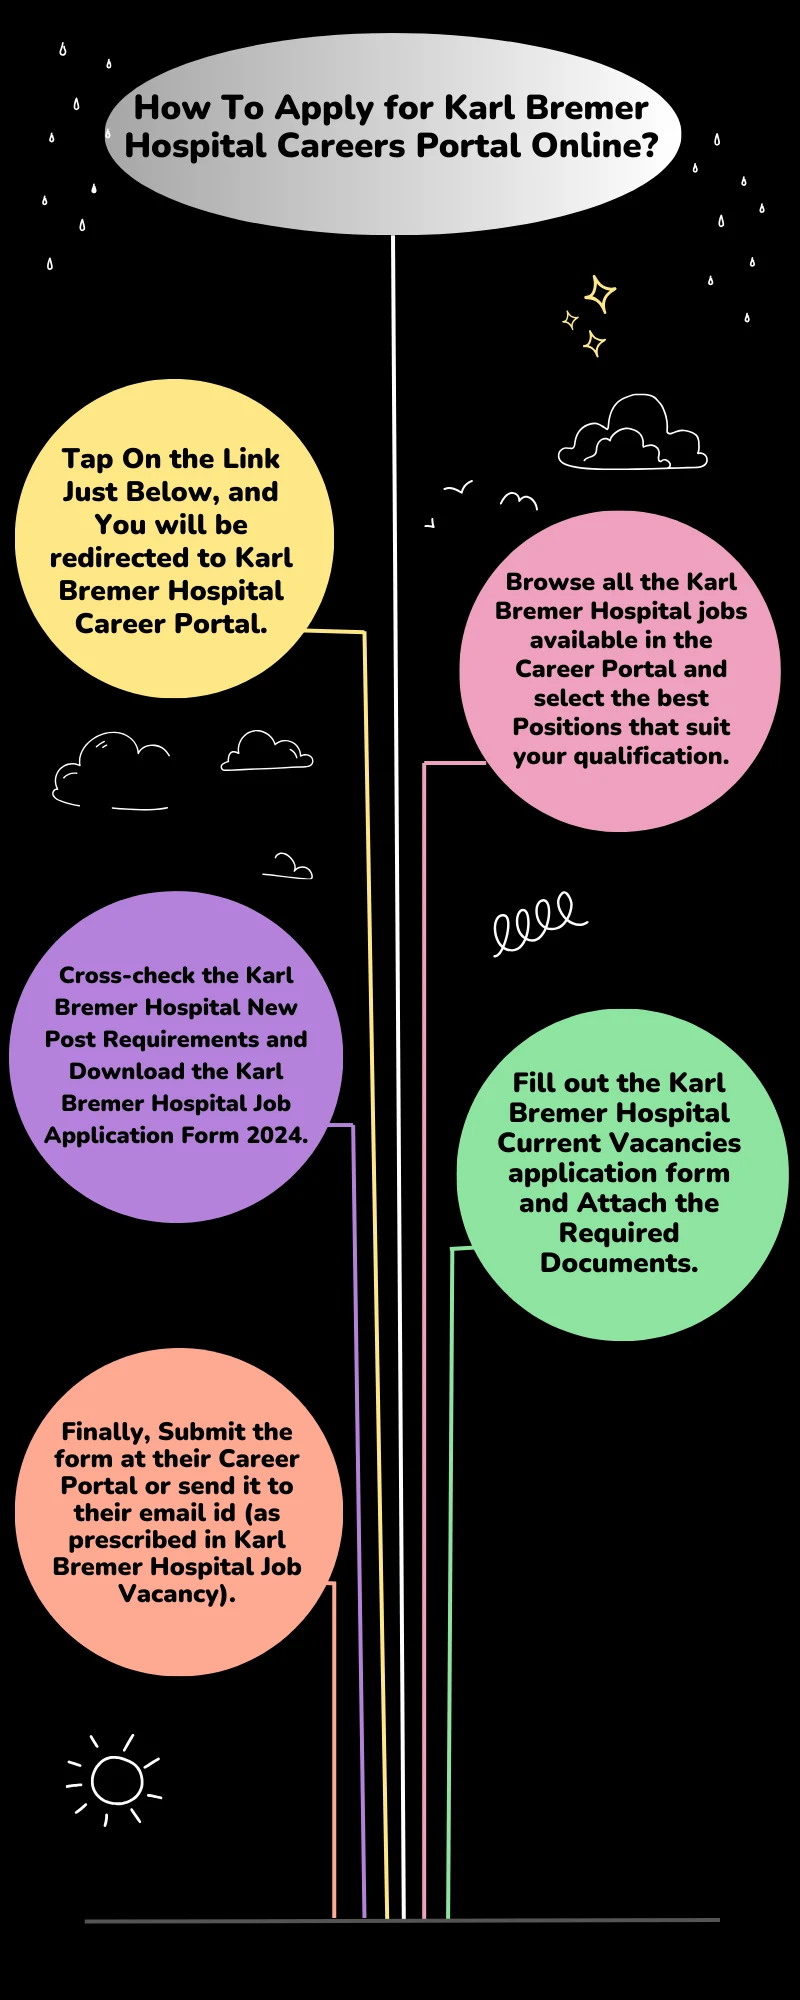 How To Apply for Karl Bremer Hospital Careers Portal Online?